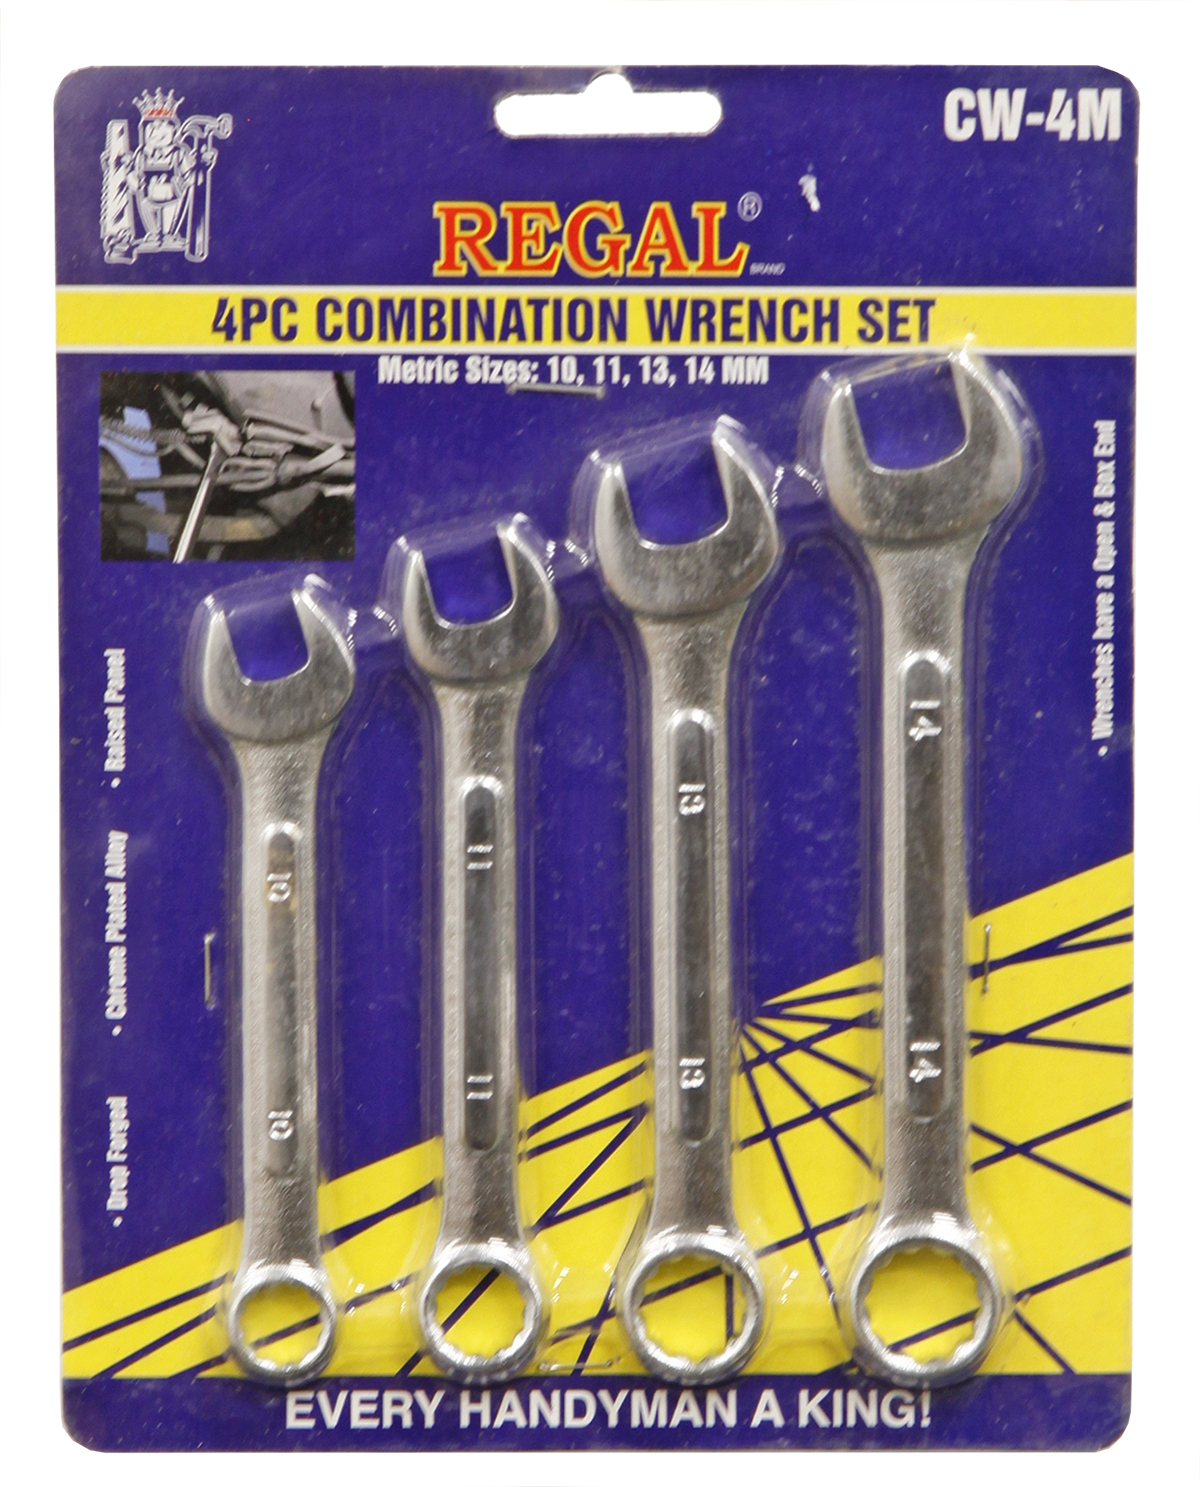 Regal CW-4M Combination Wrench Set 4-Piece at Sutherlands